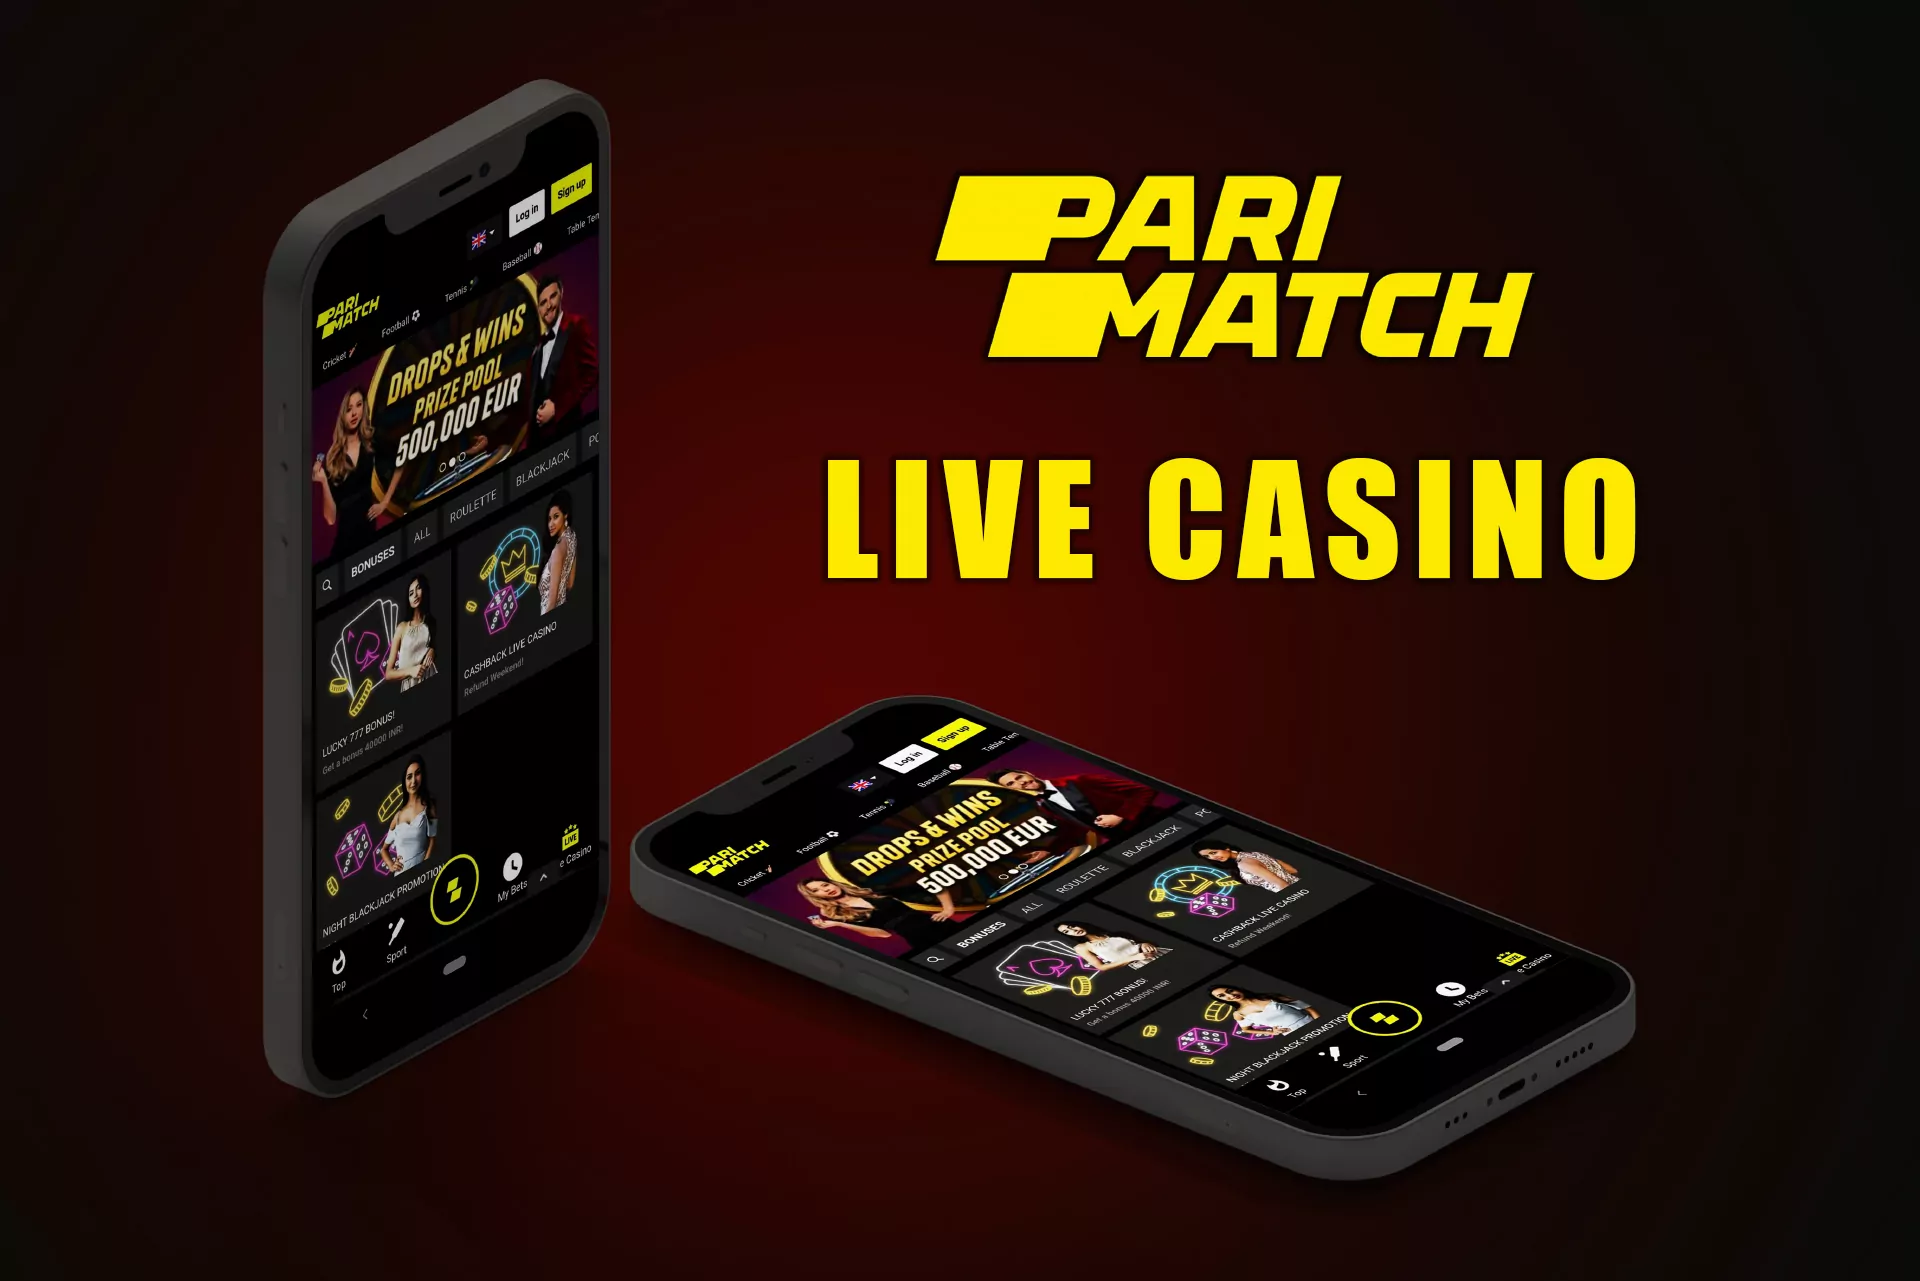 For fans of games with a live dealer, there is the live casino section in the app.